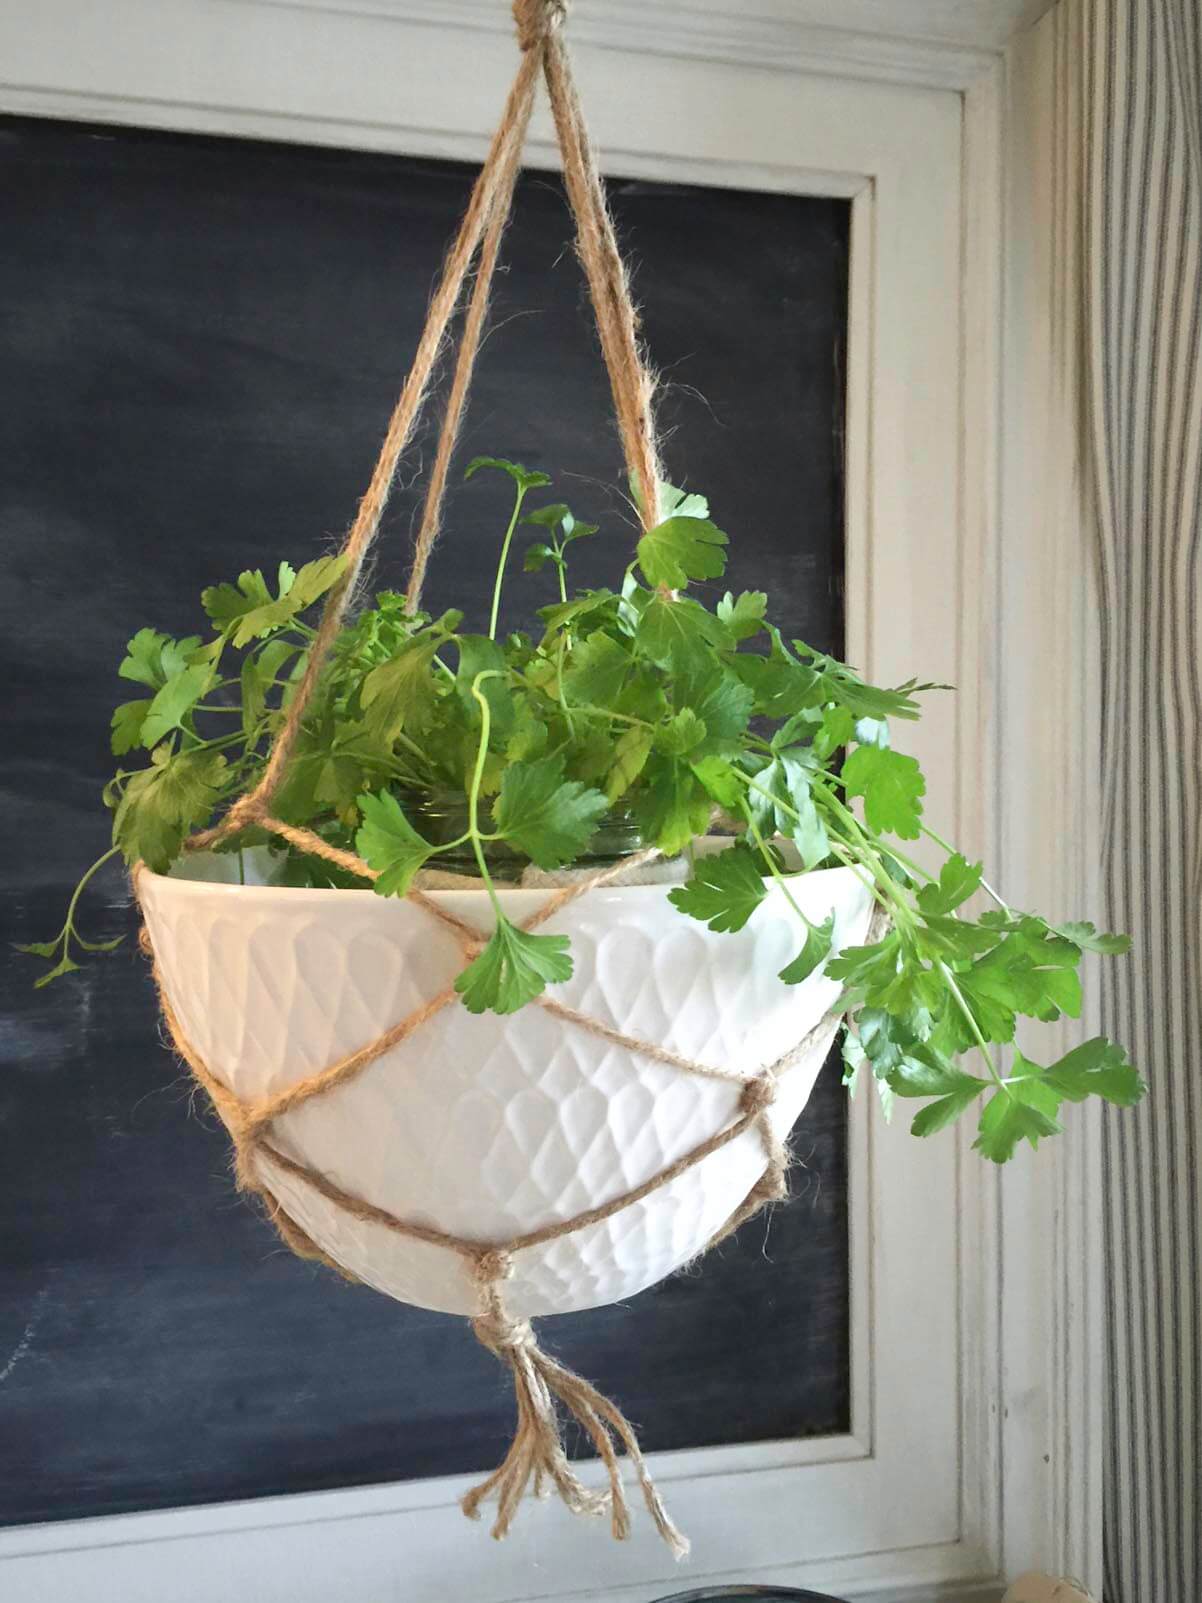 This DIY macrame hanging planter is so easy make!  Check out the full tutorial!